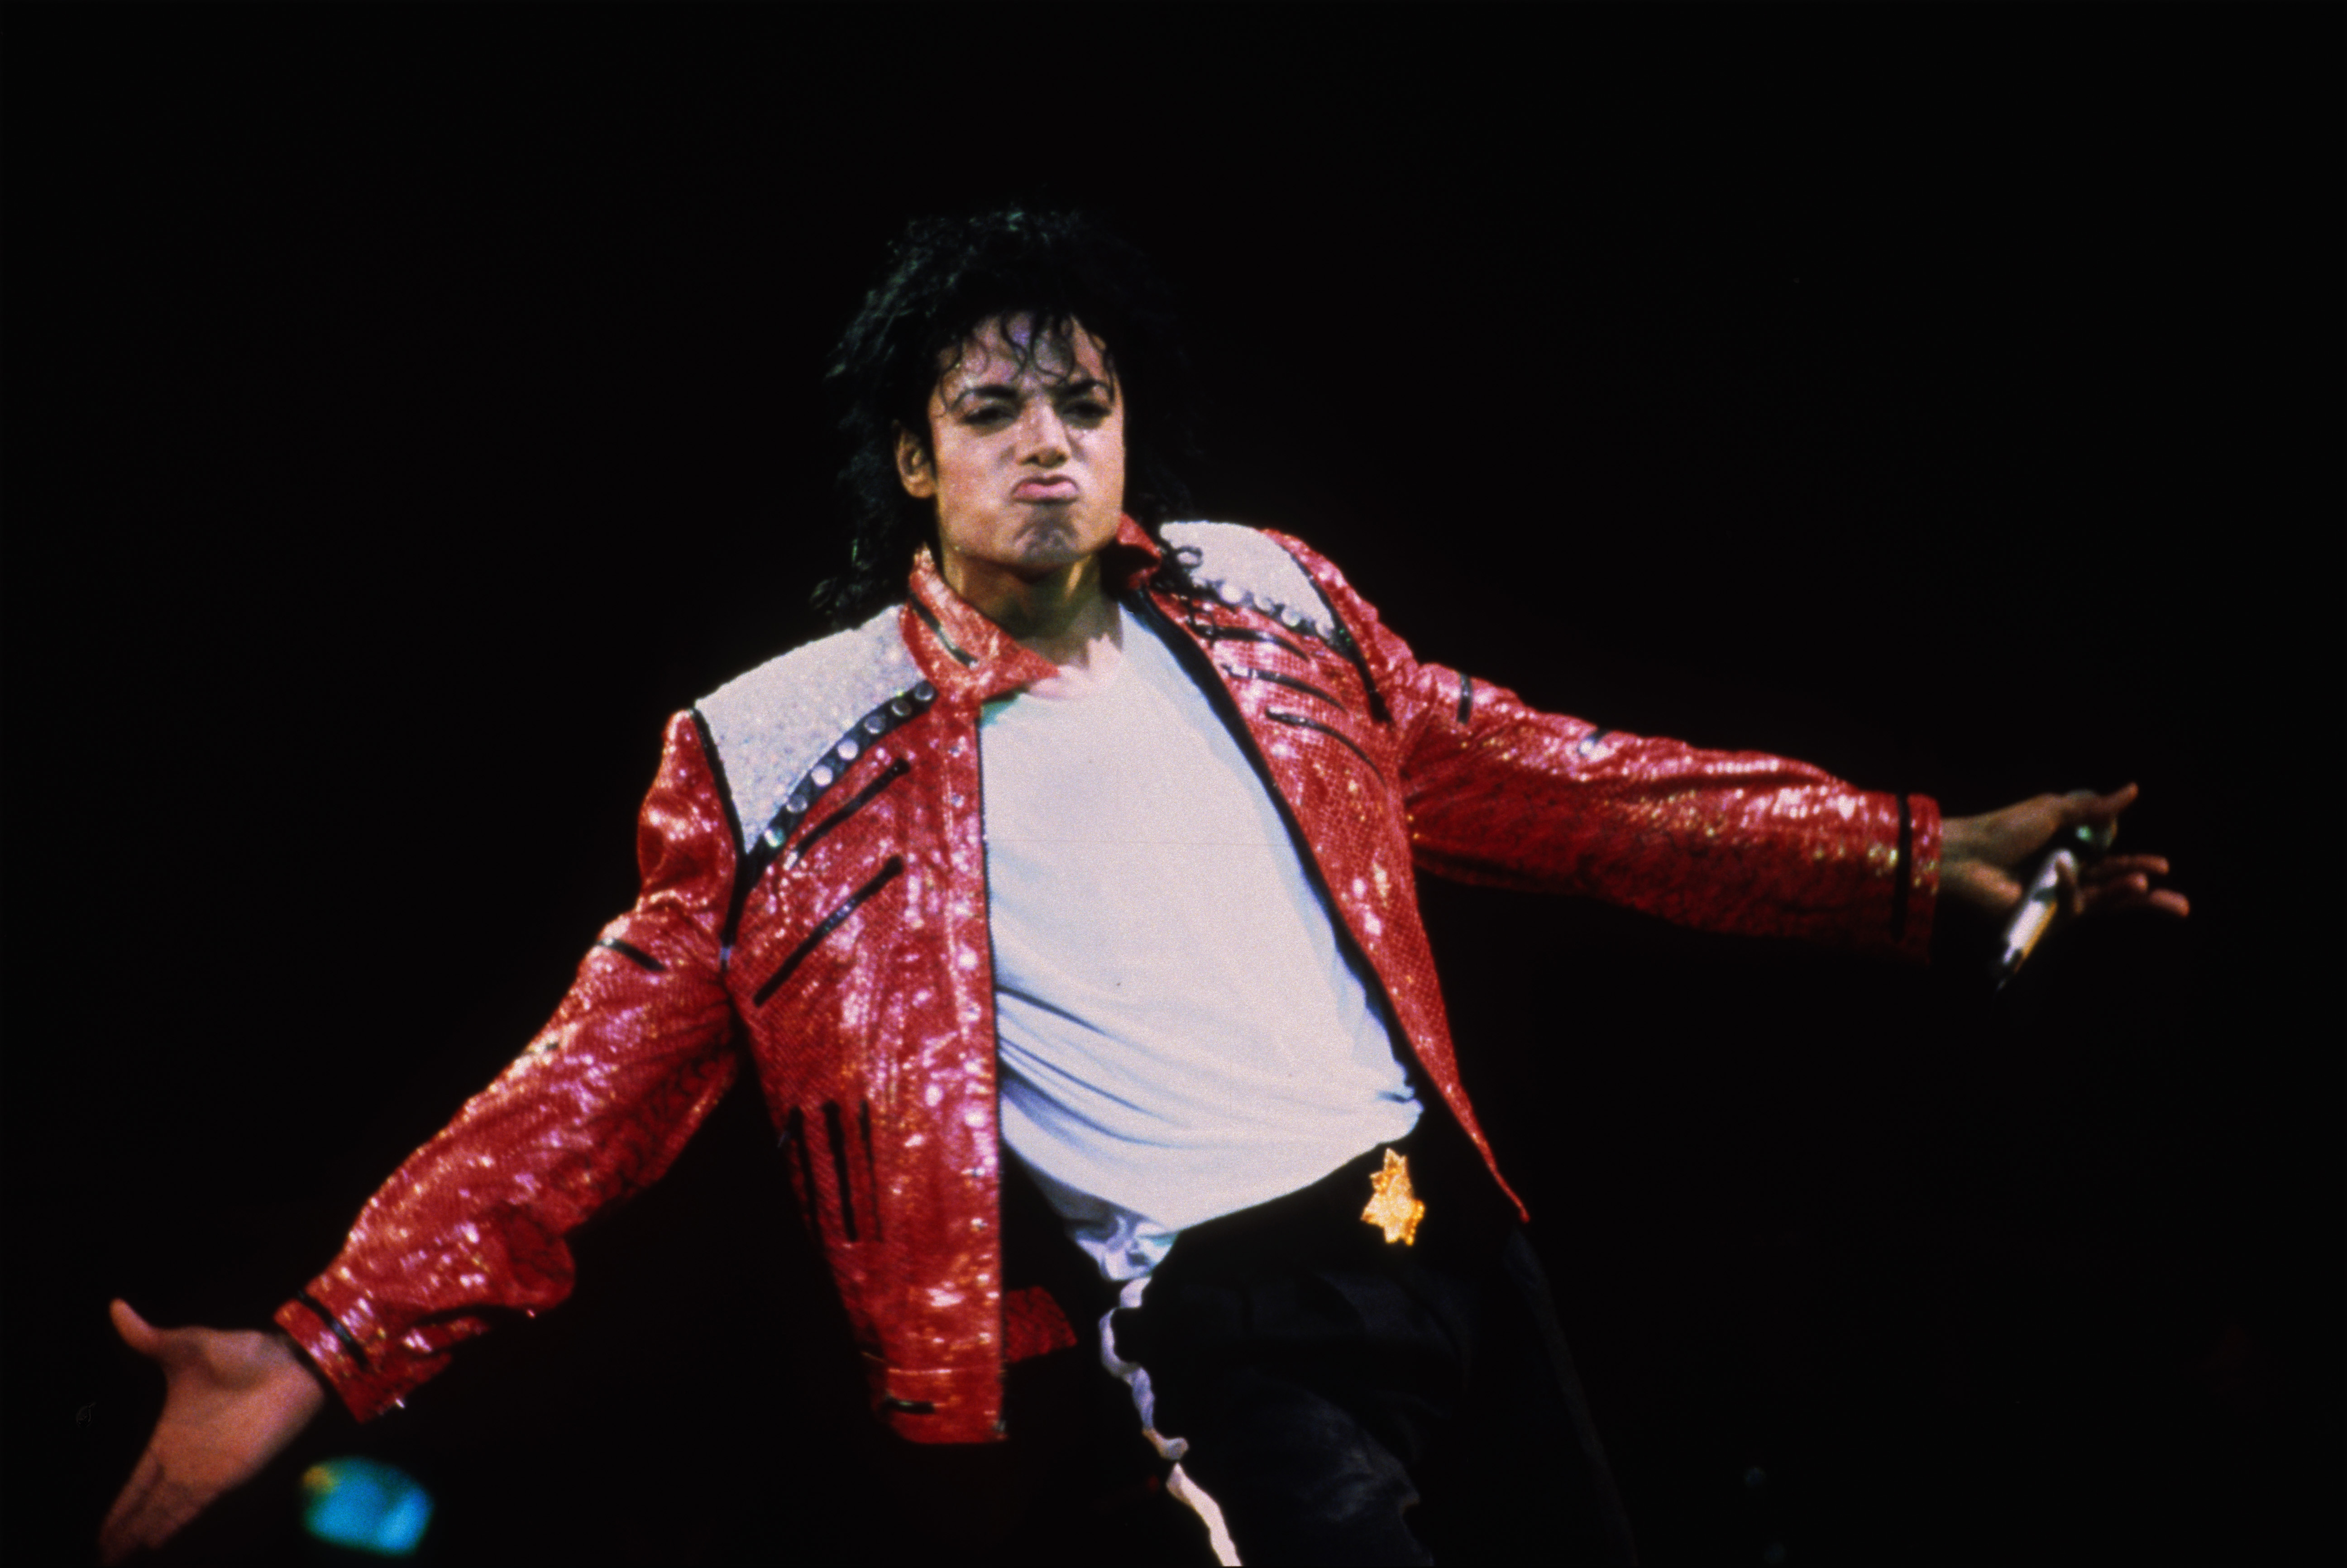 Michael Jackson performs onstage, circa 1986 | Source: Getty Images